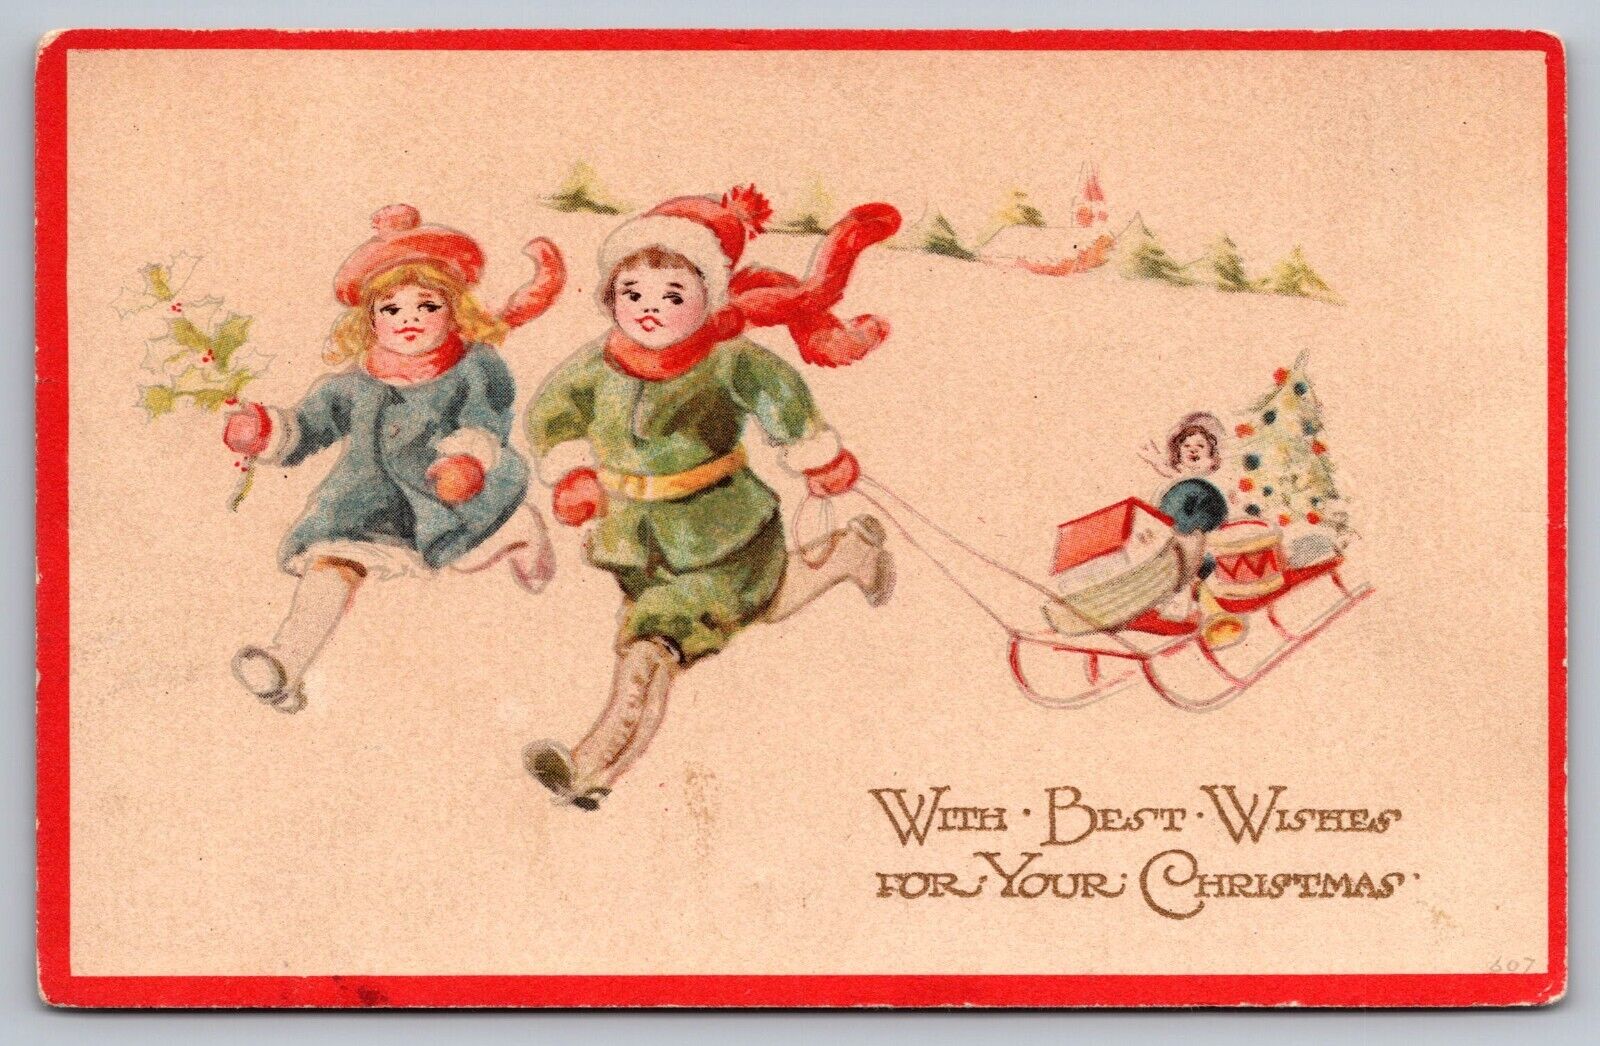 With Best Wishes For Your Christmas Antique Postcard